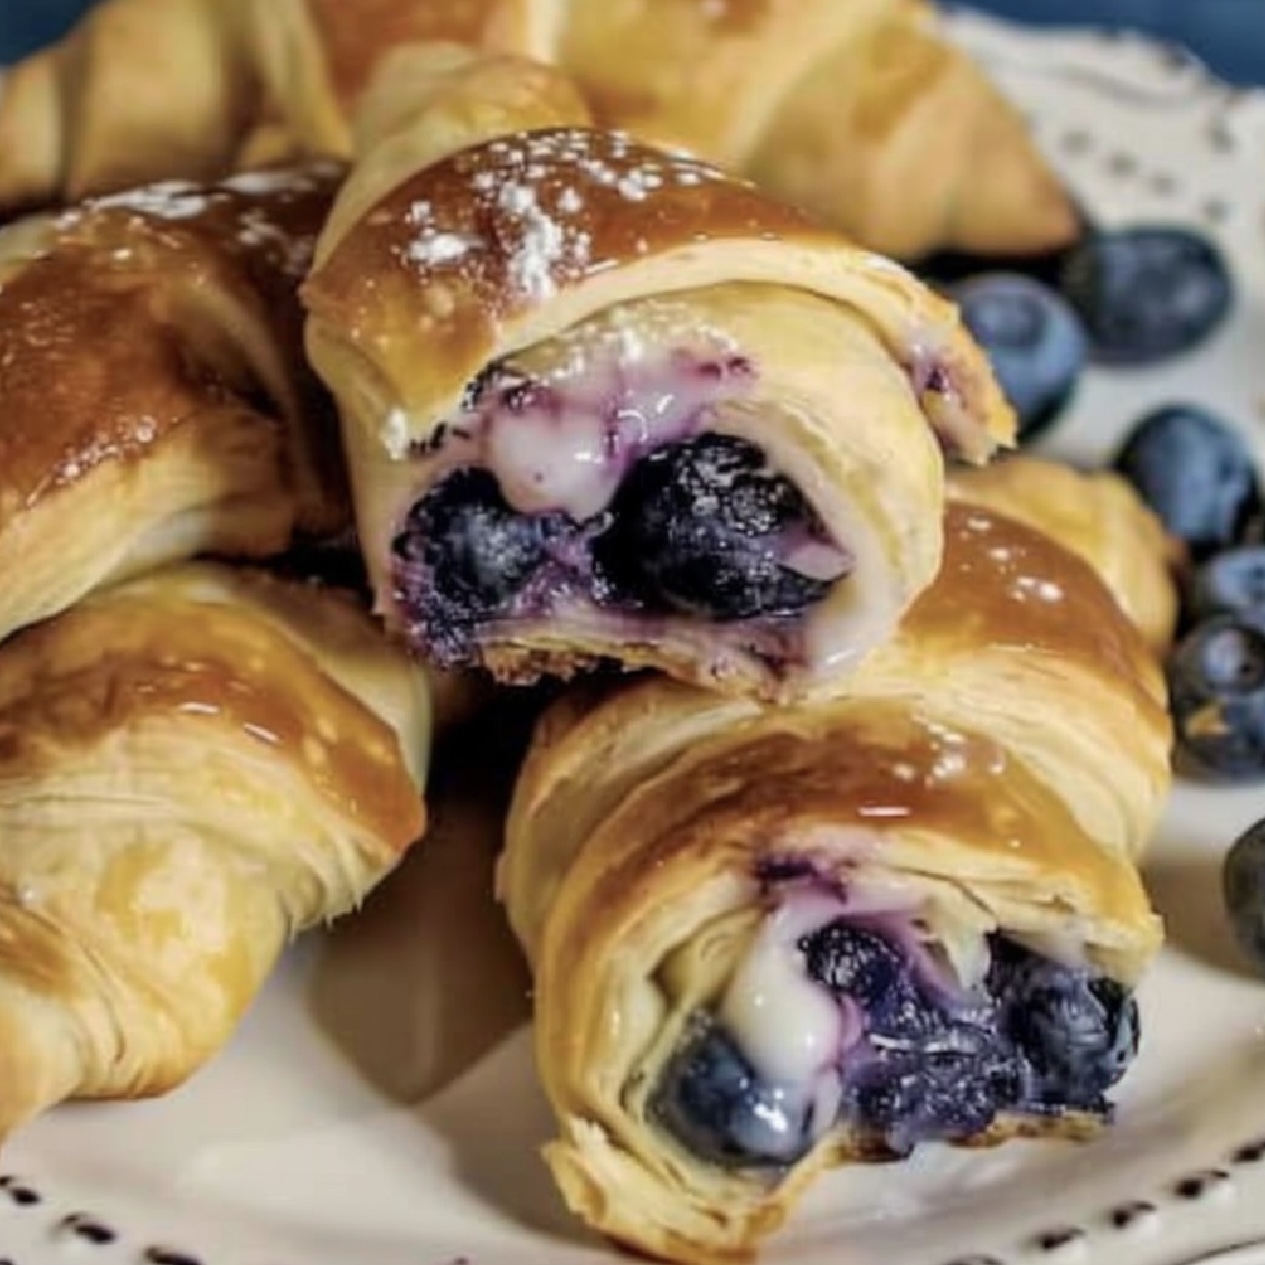 Whip up these delicious Blueberry Cheesecake Rolls in just 25 minutes! Perfect for a last-minute dessert that's sure to impress.